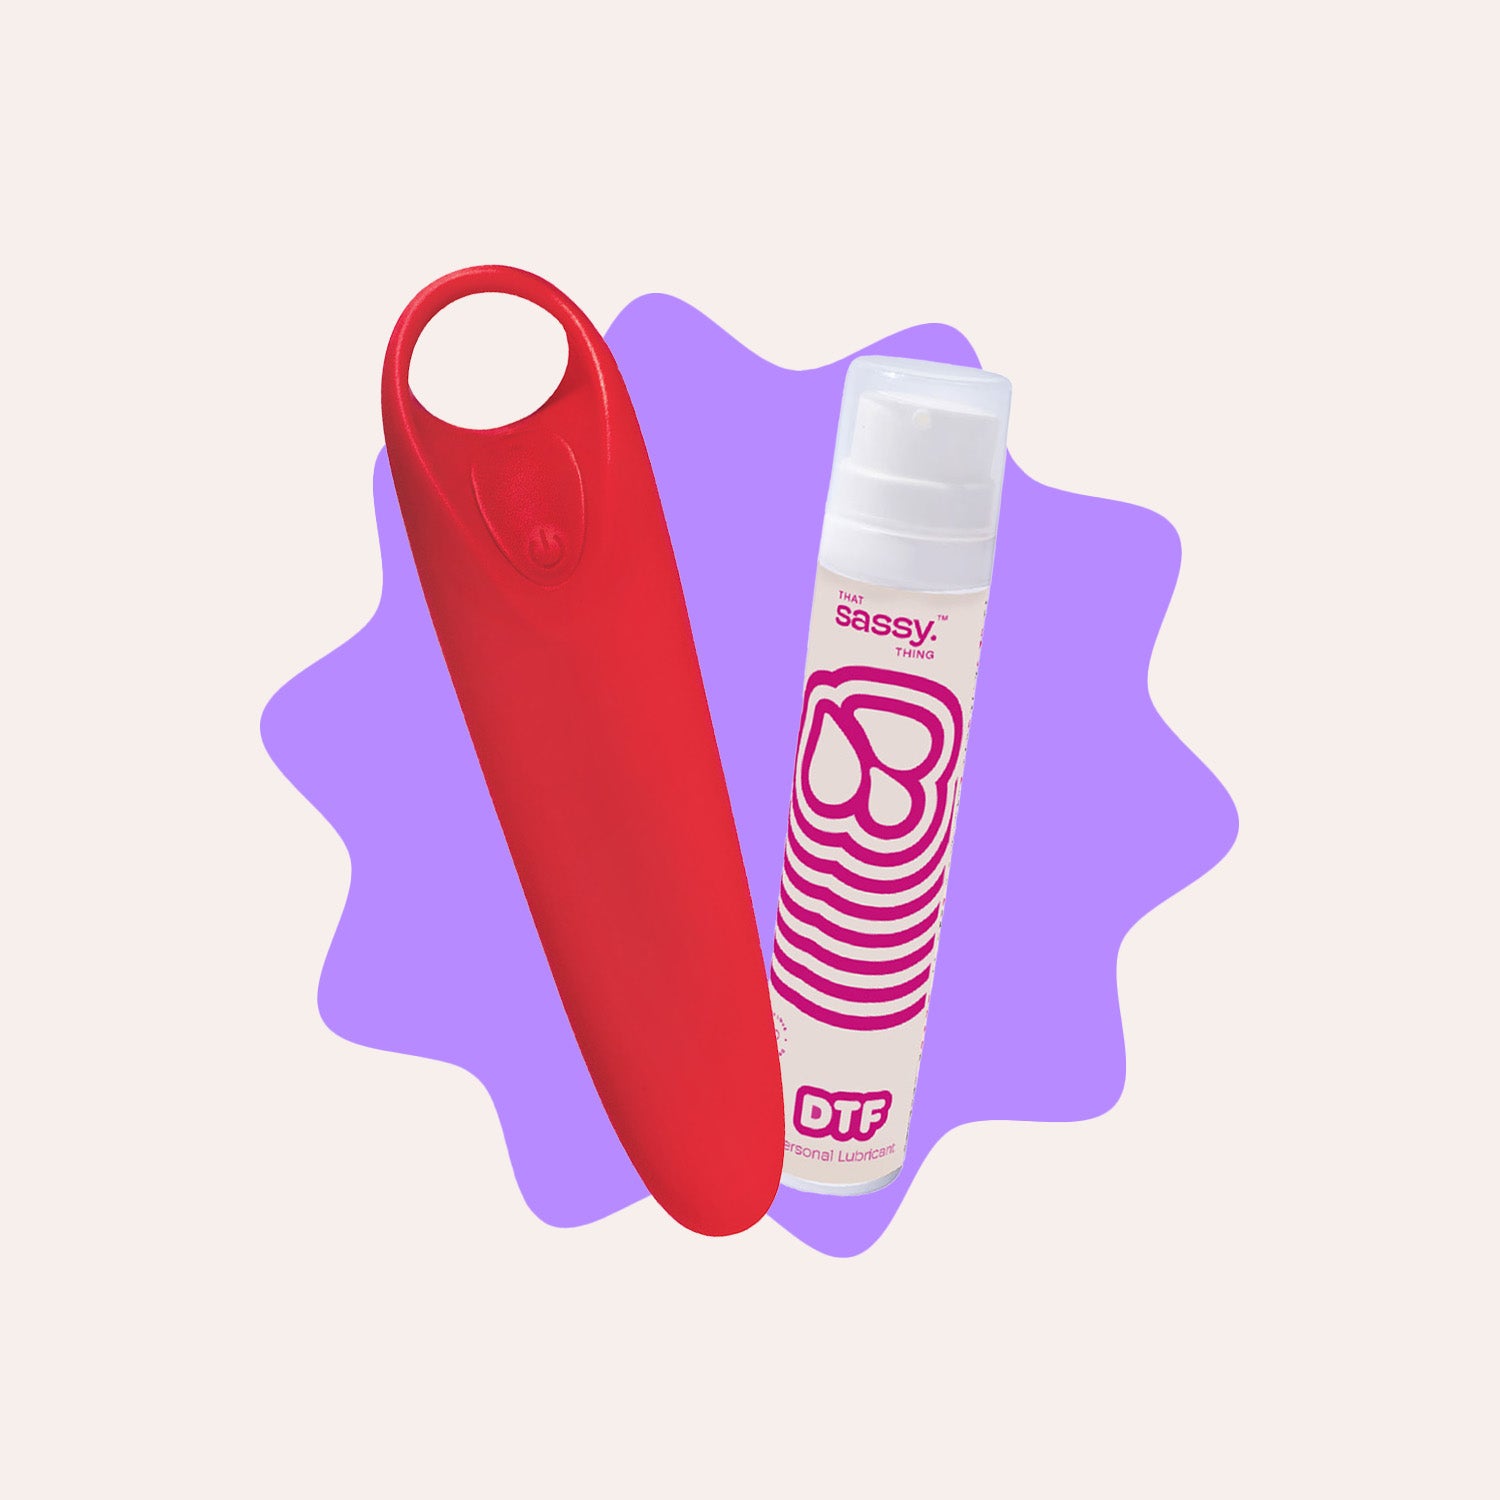 Retro Red Candy Personal Massager Displayed with DTF Aloe-Based Personal Lubrication